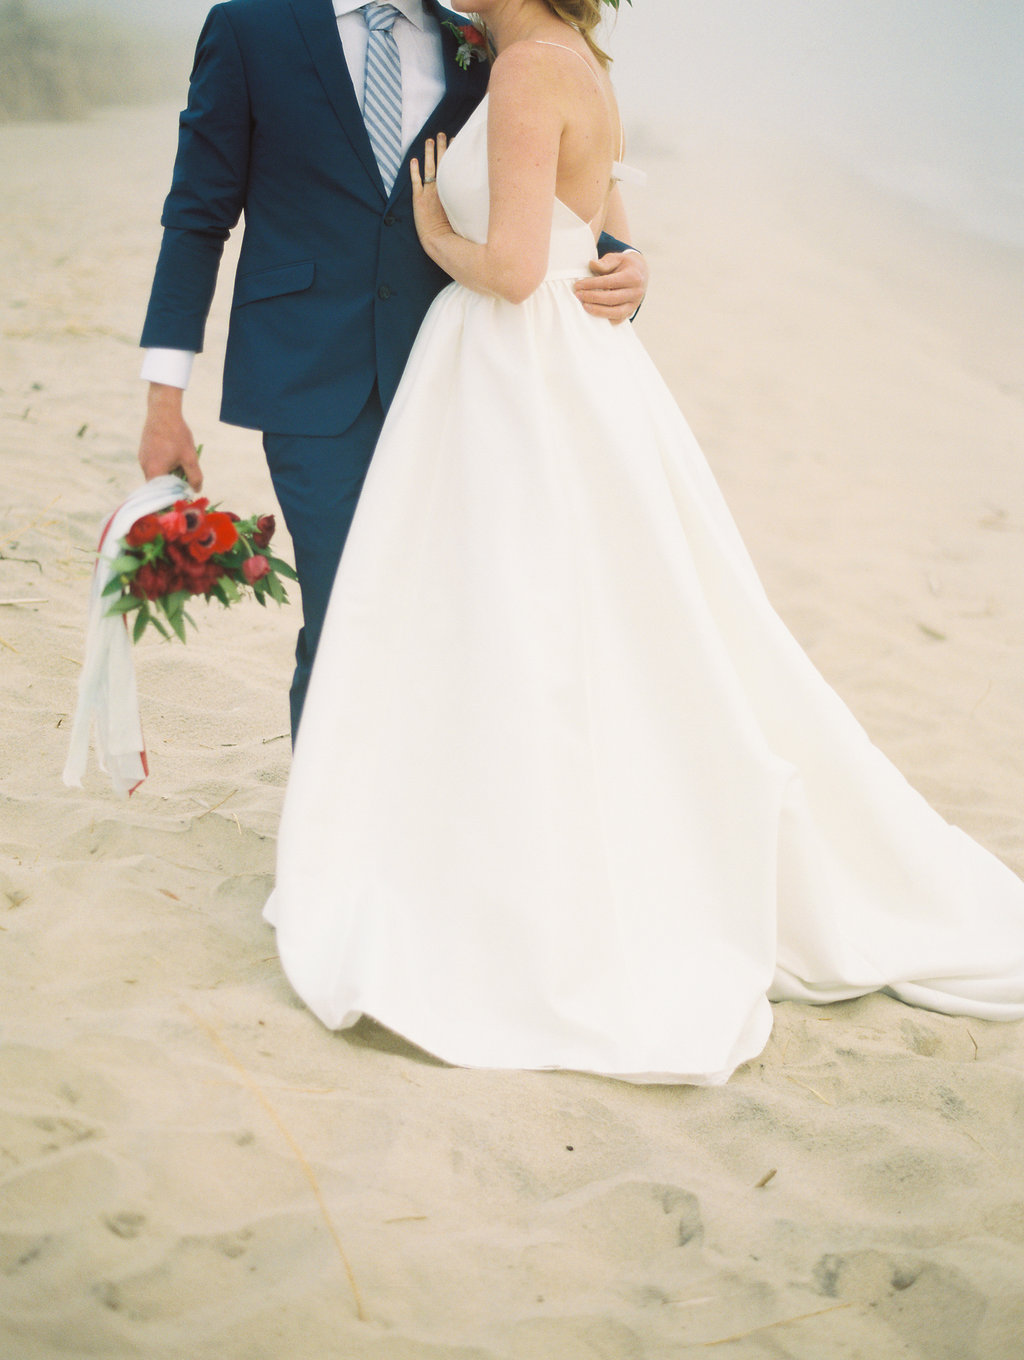 Couple hugging during their Lake Michigan wedding on the beach